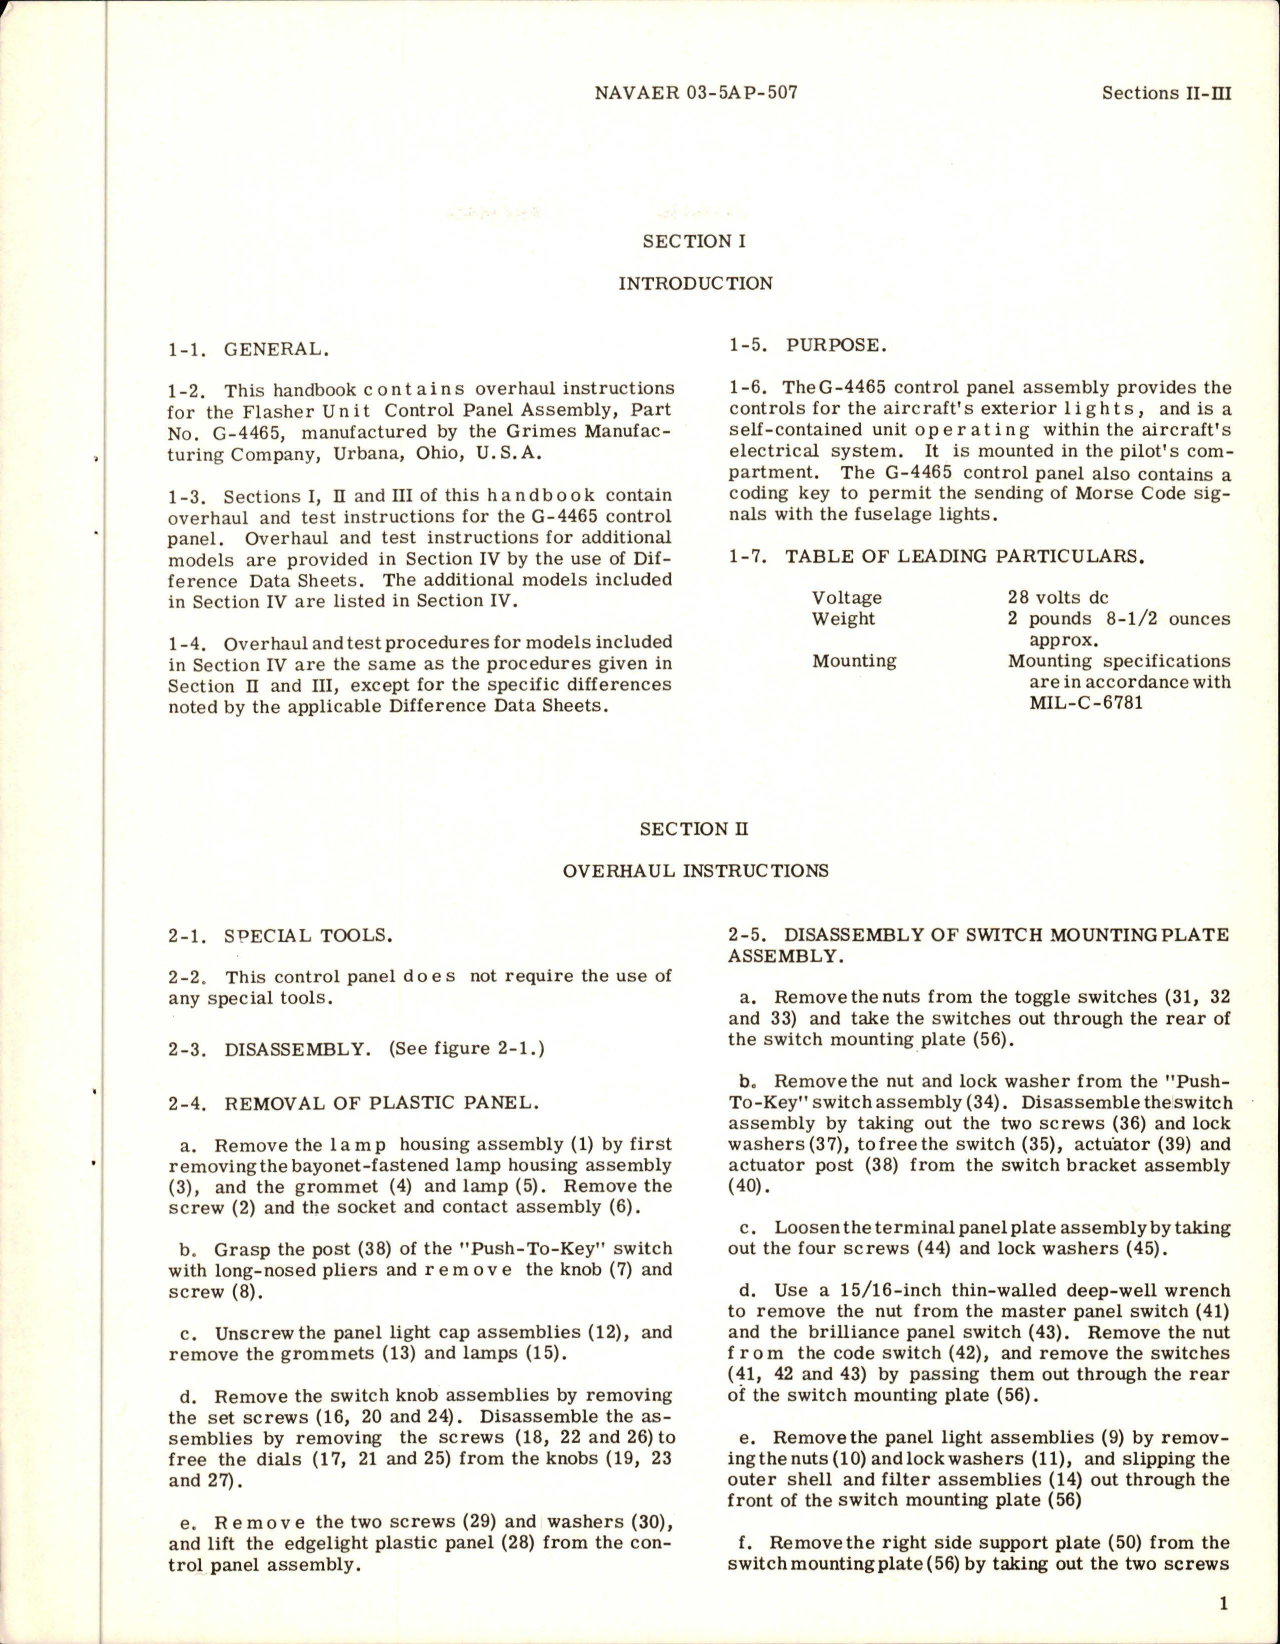 Sample page 5 from AirCorps Library document: Overhaul Instructions for Flasher Unit Control Panel Assy - Part G-4465